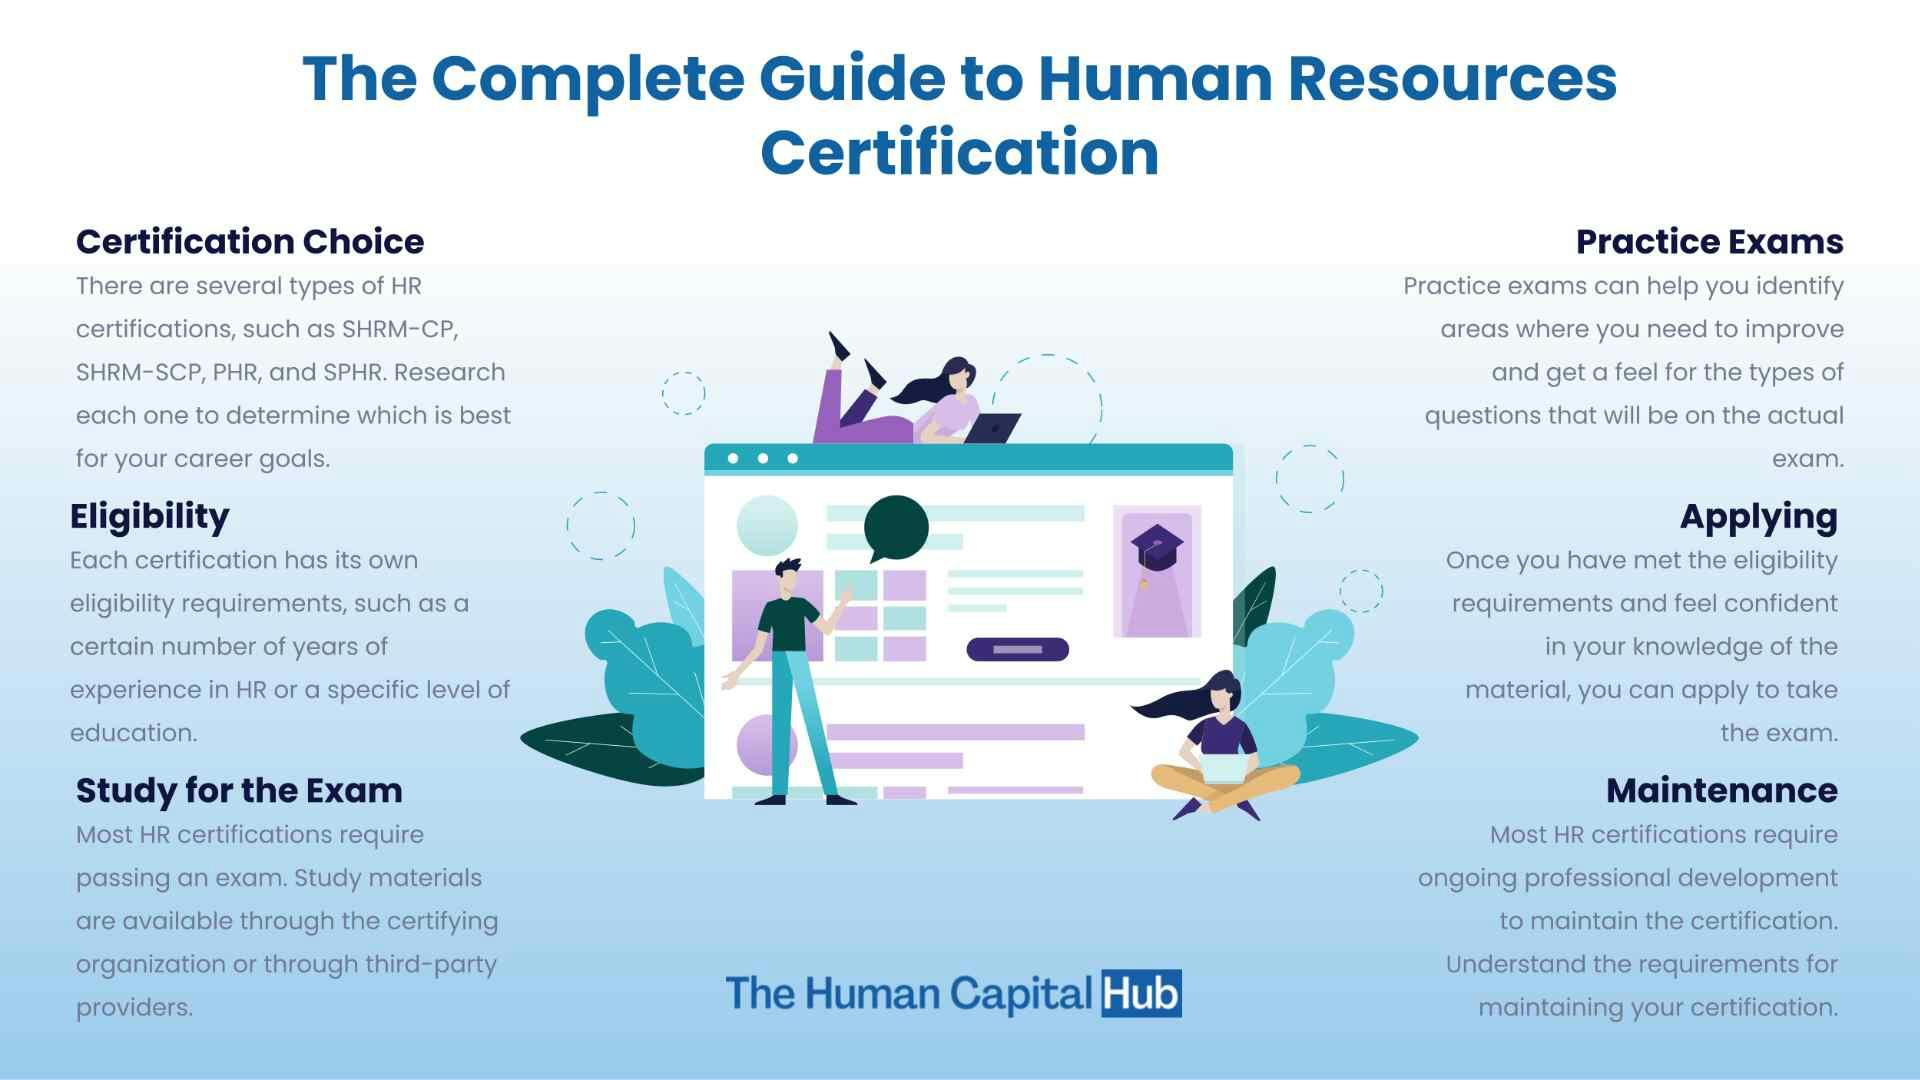 Human Resources Certification: Complete Guide